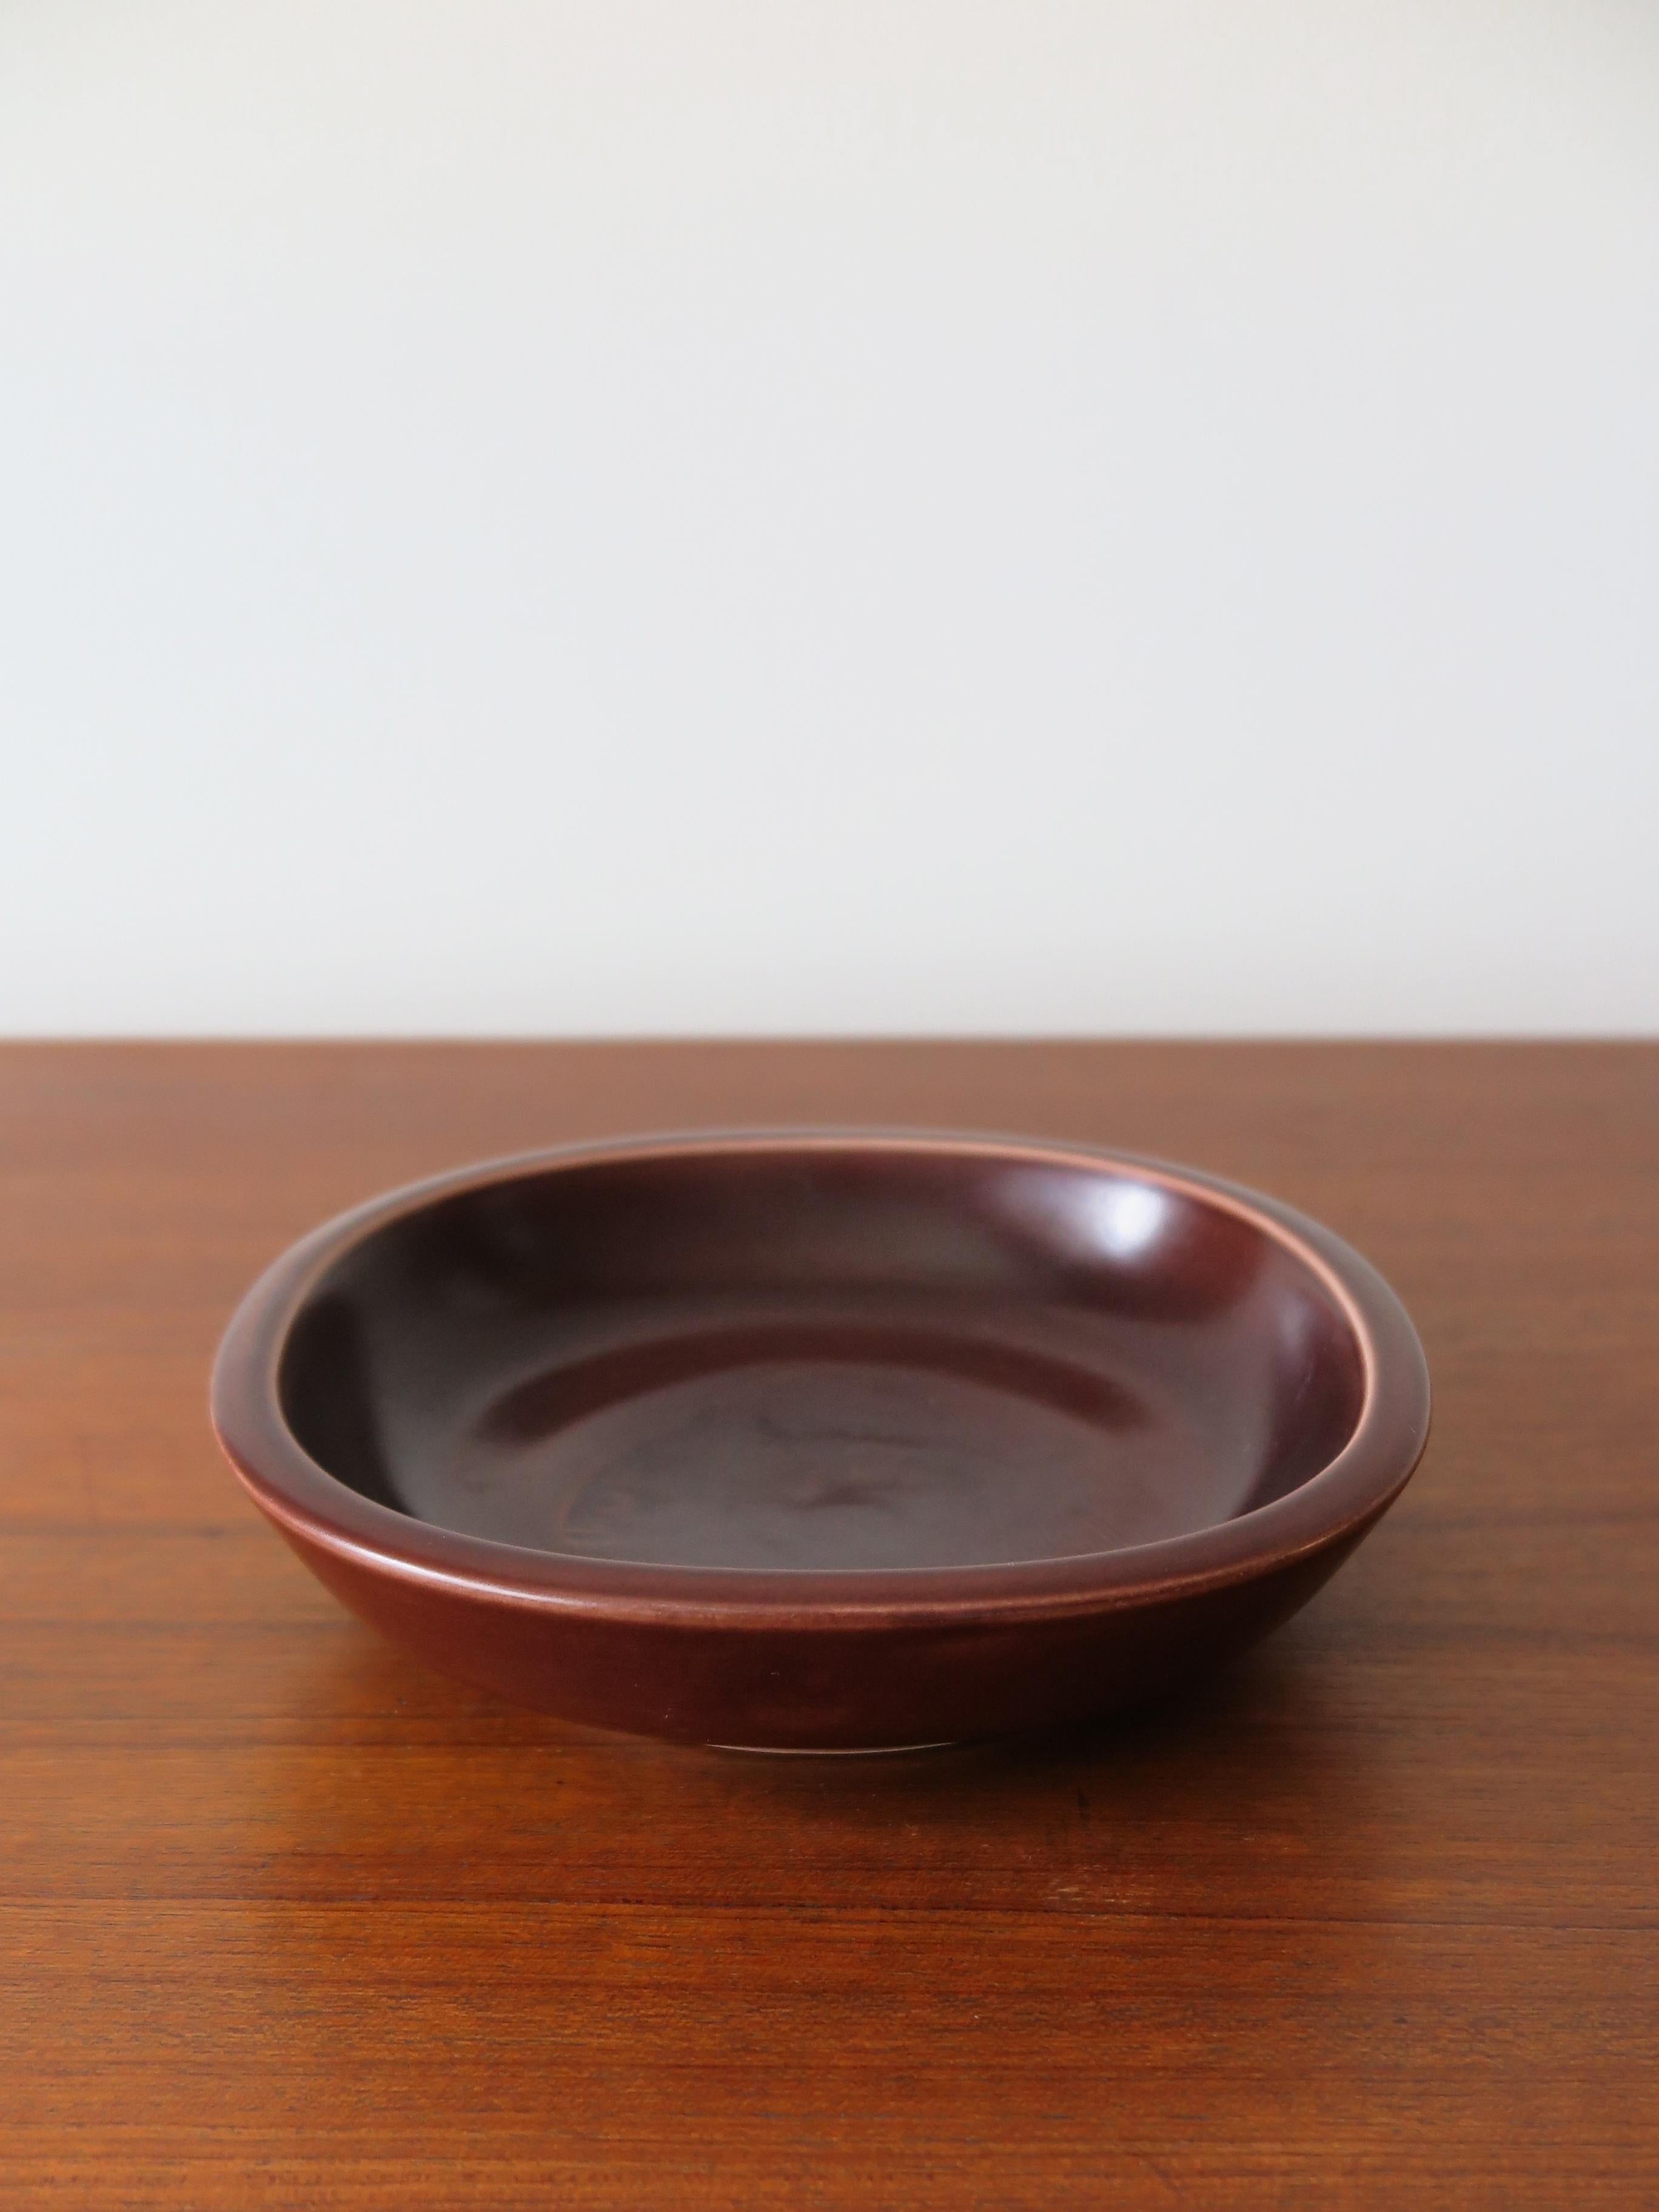 Scandinavian ceramic “Marselis” ashtray bowl series designed by Danish artist Nils Thorsson for Royal Copenaghen, 1950s.

Please note that the litem is original of the period and this shows normal signs of age and use.